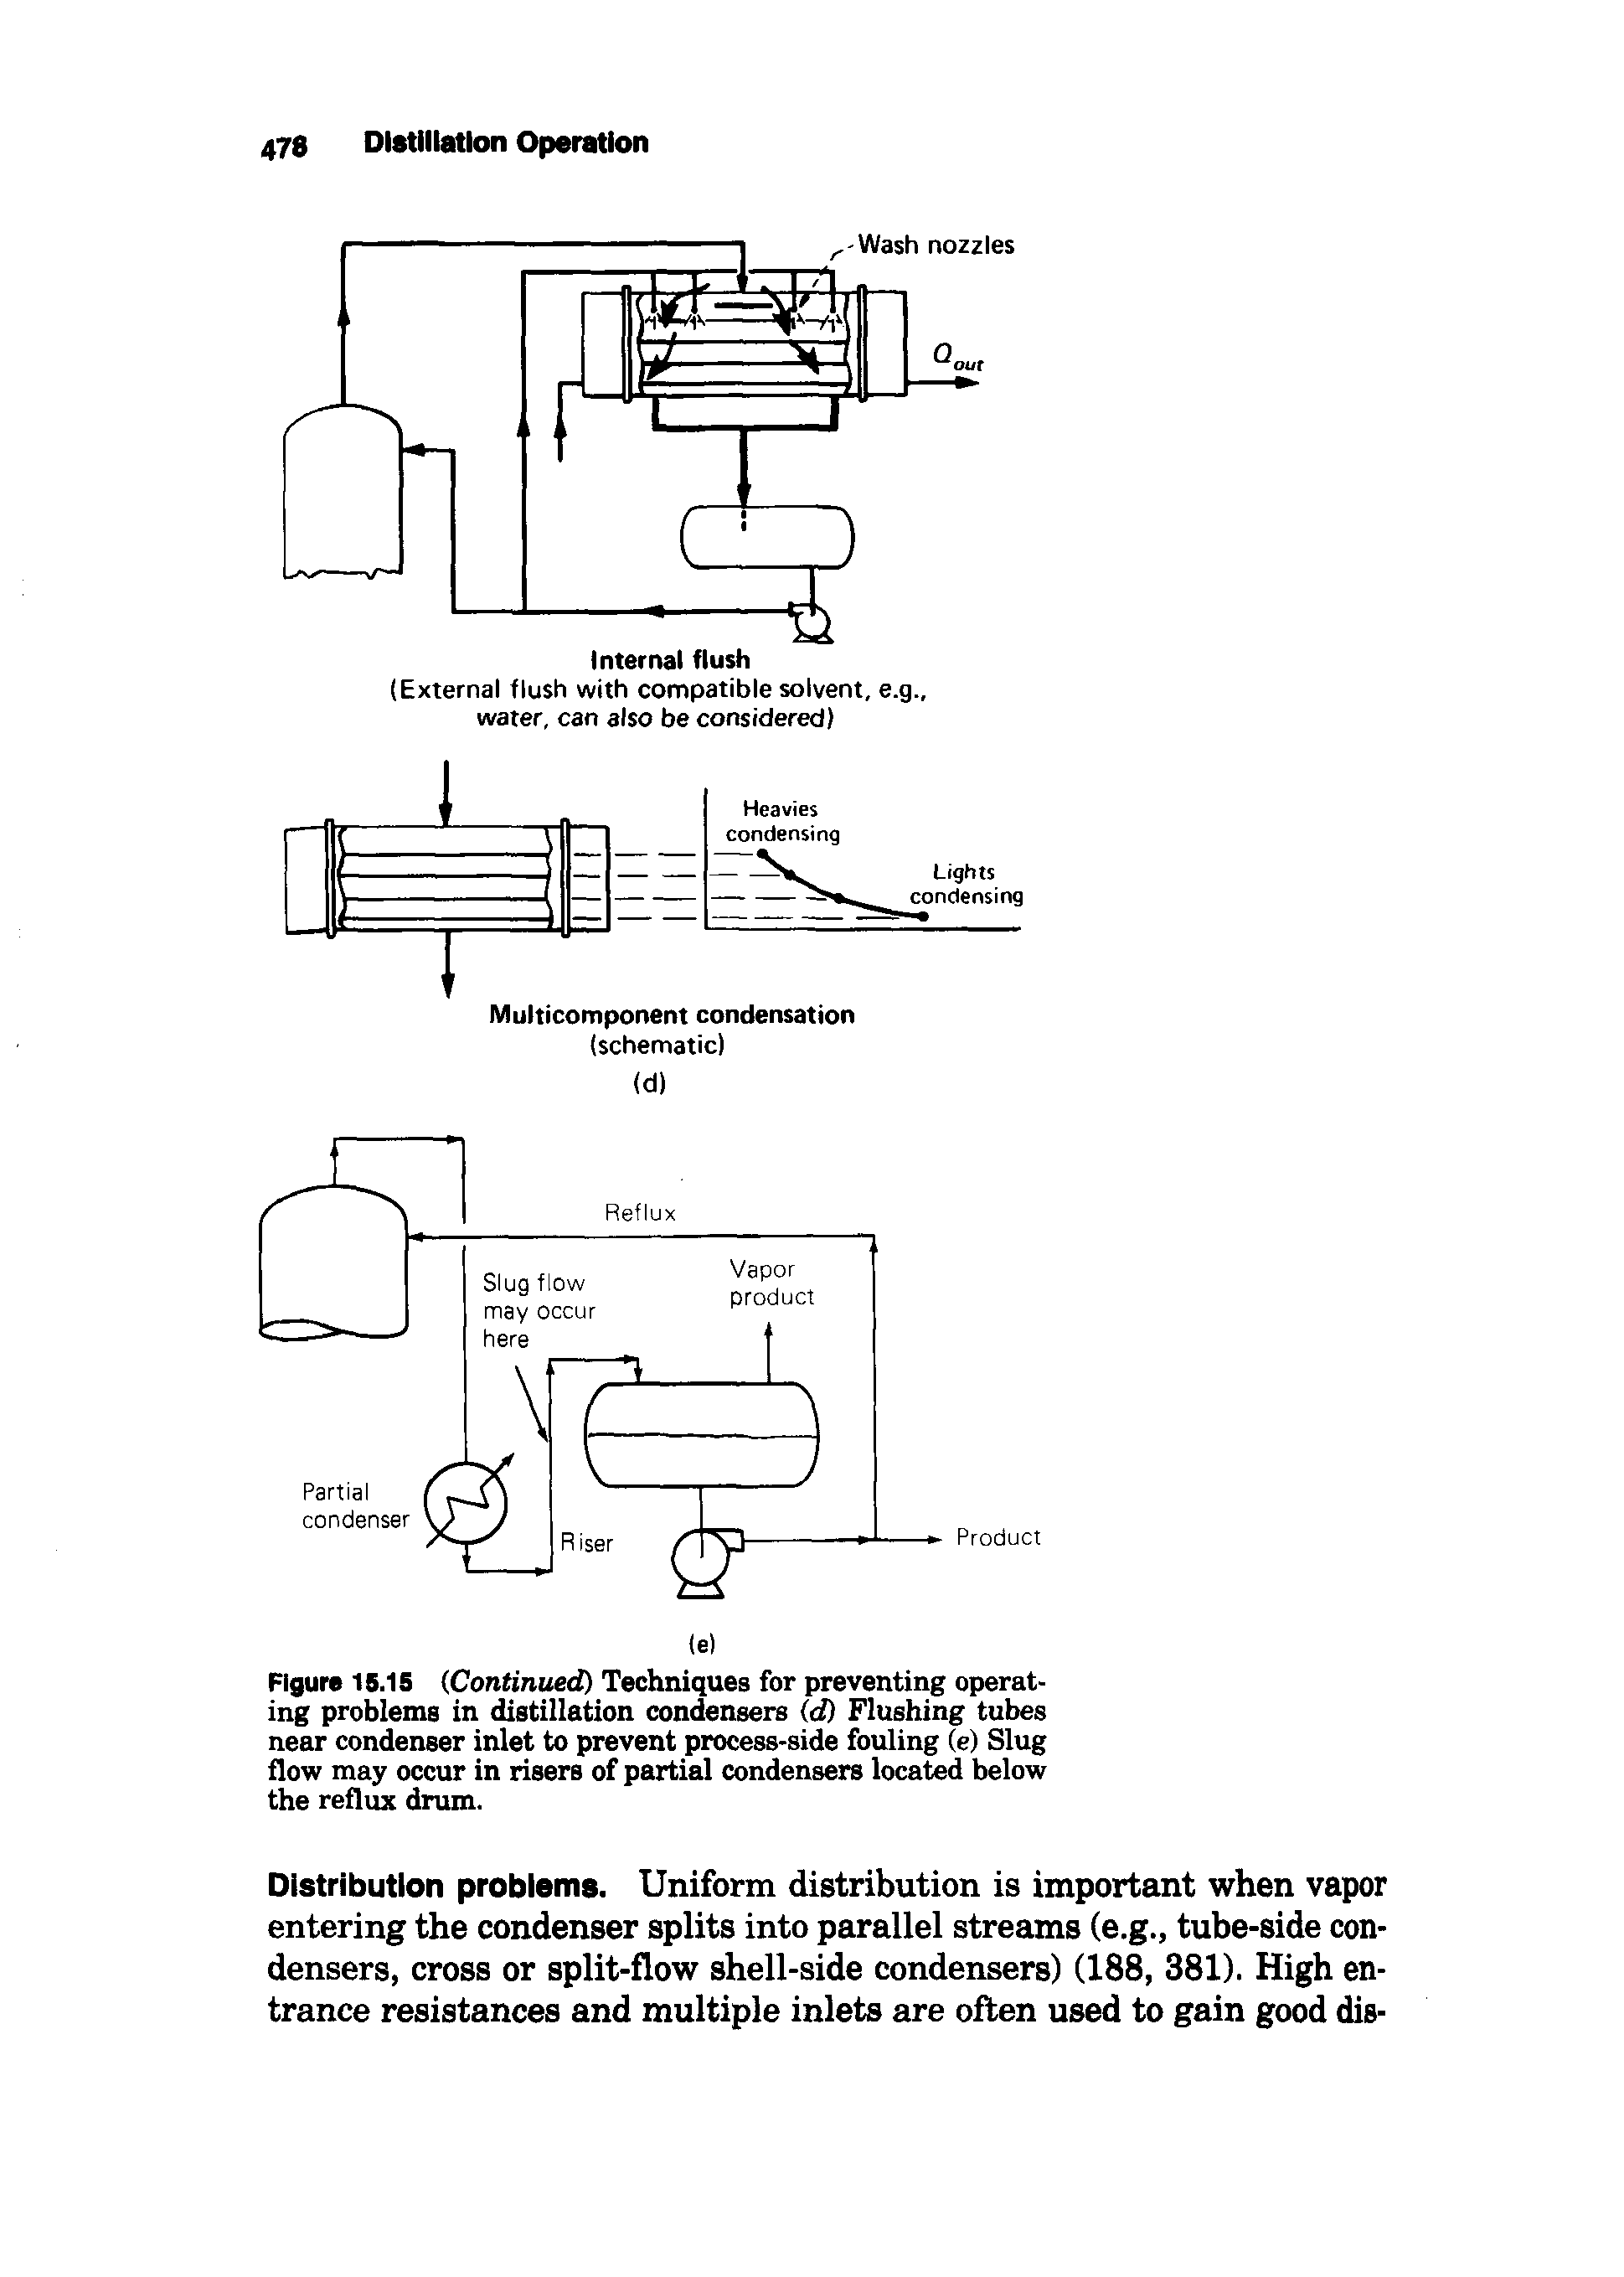 Figure 15.15 (Continued) Techniques for preventing operating problems in distillation condensers (d) Flushing tubes near condenser inlet to prevent process-side fouling (e) Slug flow may occur in risers of partial condensers located below the reflux drum.